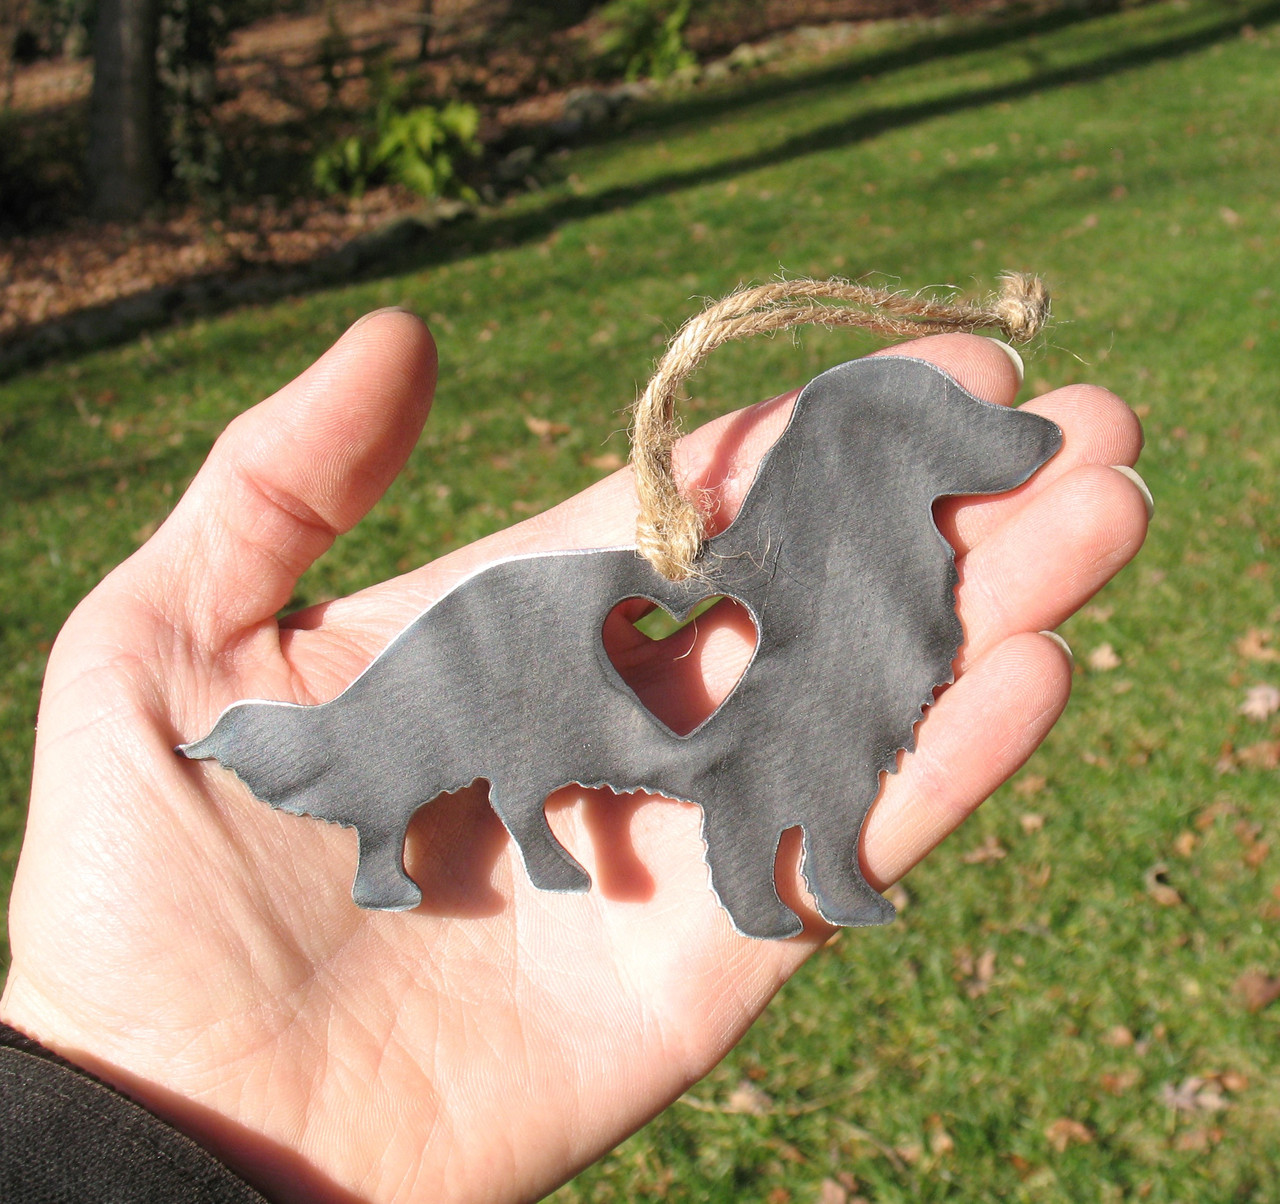 Long Haired Dachshund Dog Ornament - Metal Dog Christmas Ornament - Pet Lover Memorial Ornament - Pet Loss Dog Memorial Remembrance Gift